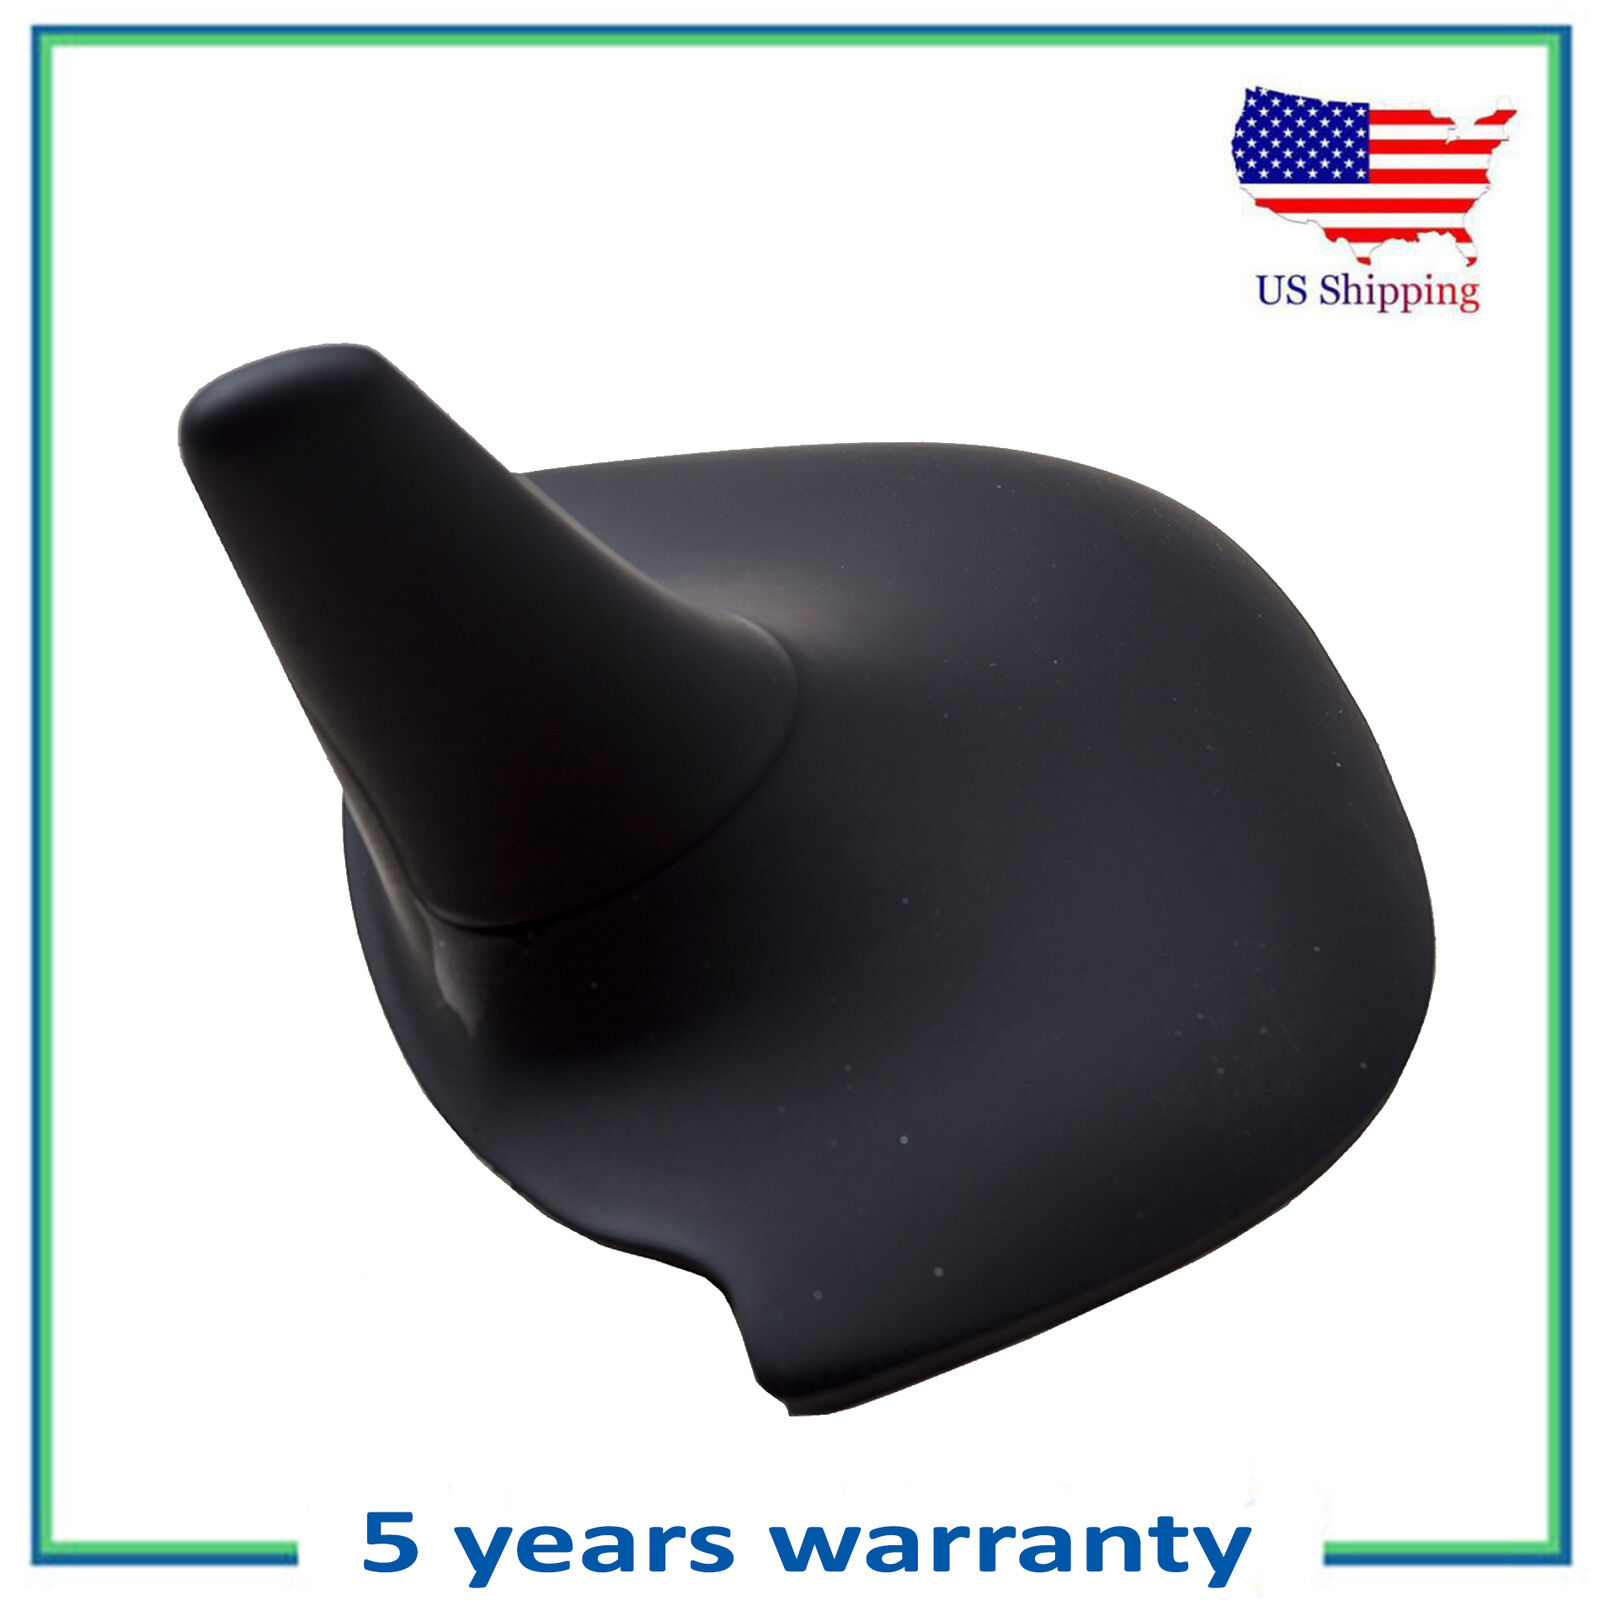 Reinforced Roof GPS Radio Antenna Cover Black For Mercedes W220 S430 S500 S600